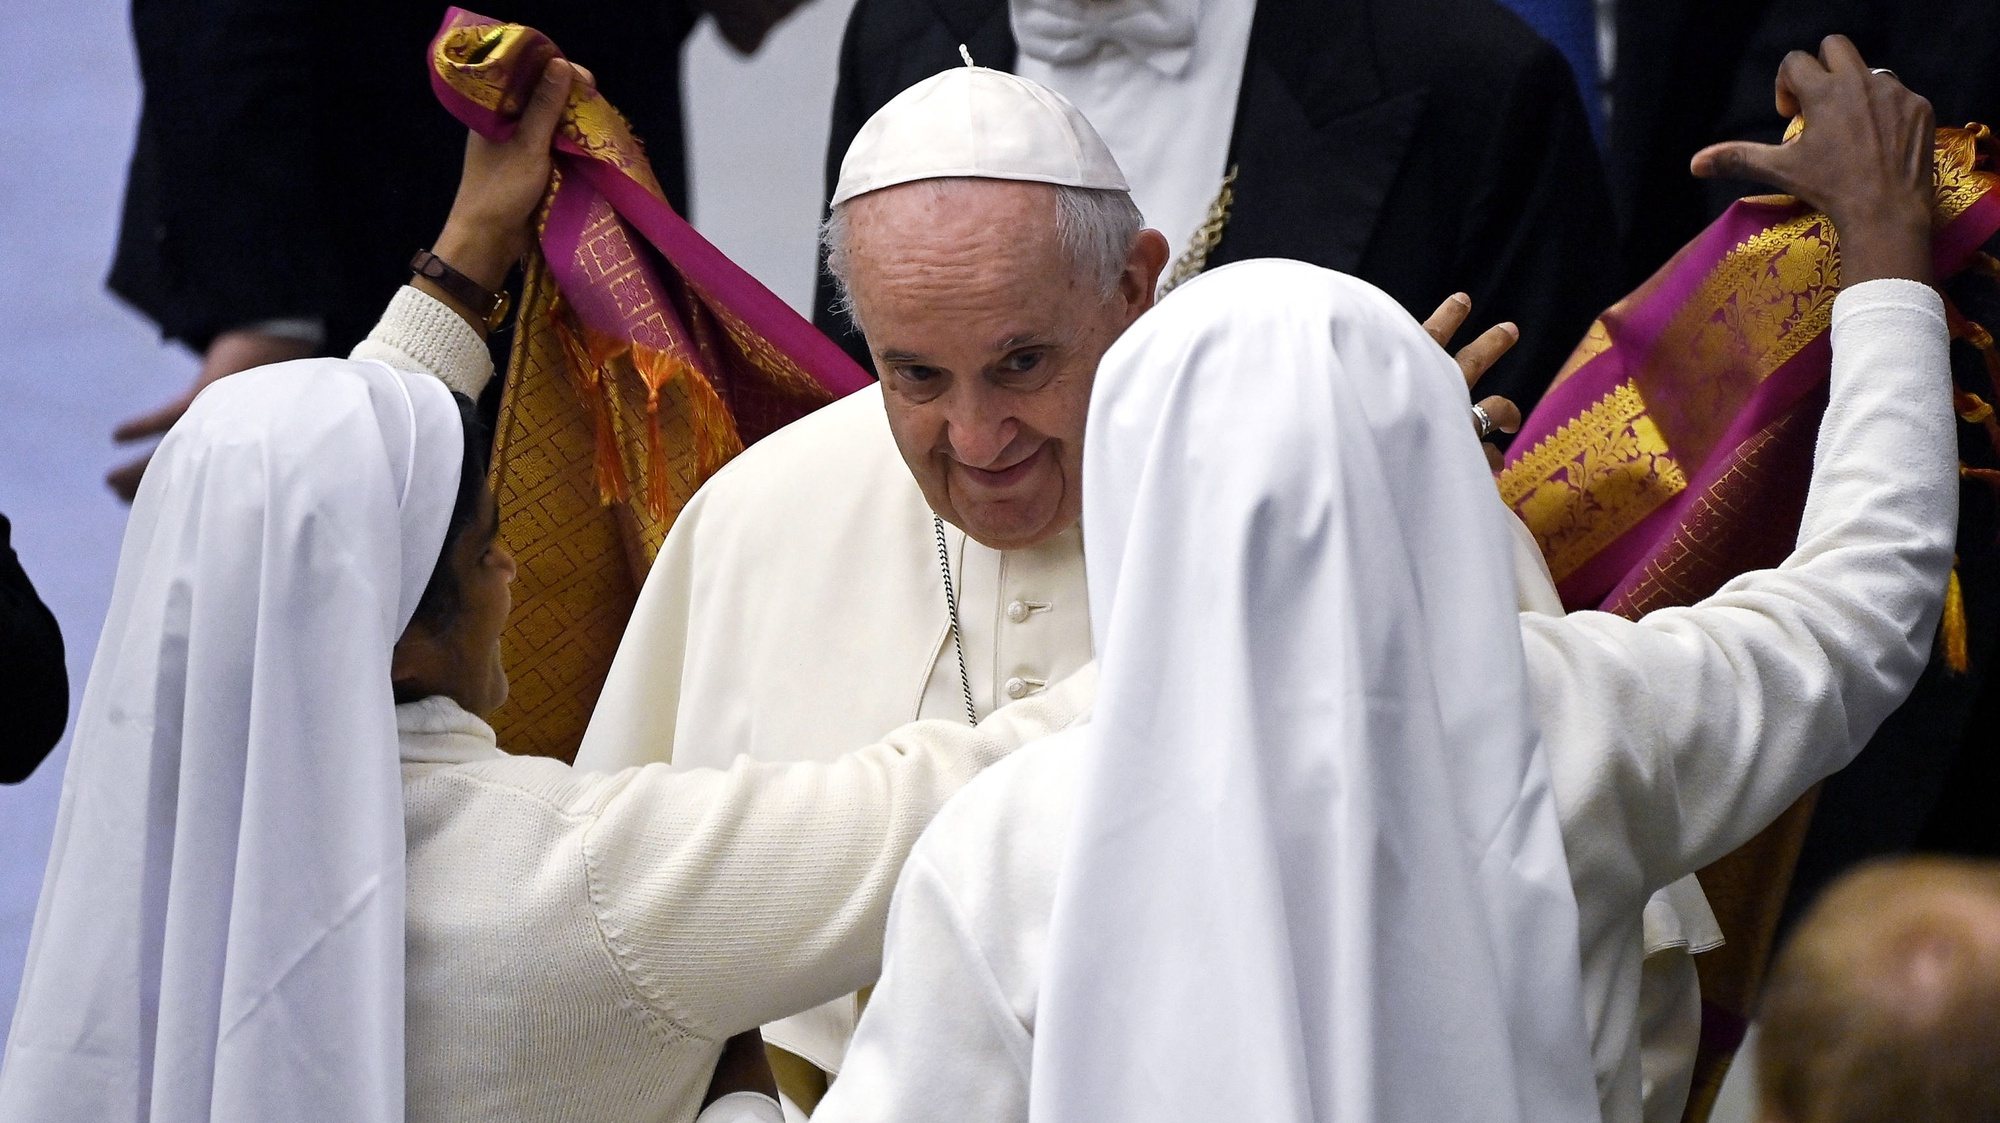 epa09659369 Pope Francis receives an Indian scarf as a gift by two nuns during his weekly General Audience in the Paul VI Audience Hall, Vatican City, 29 December 2021.  EPA/Riccardo Antimiani